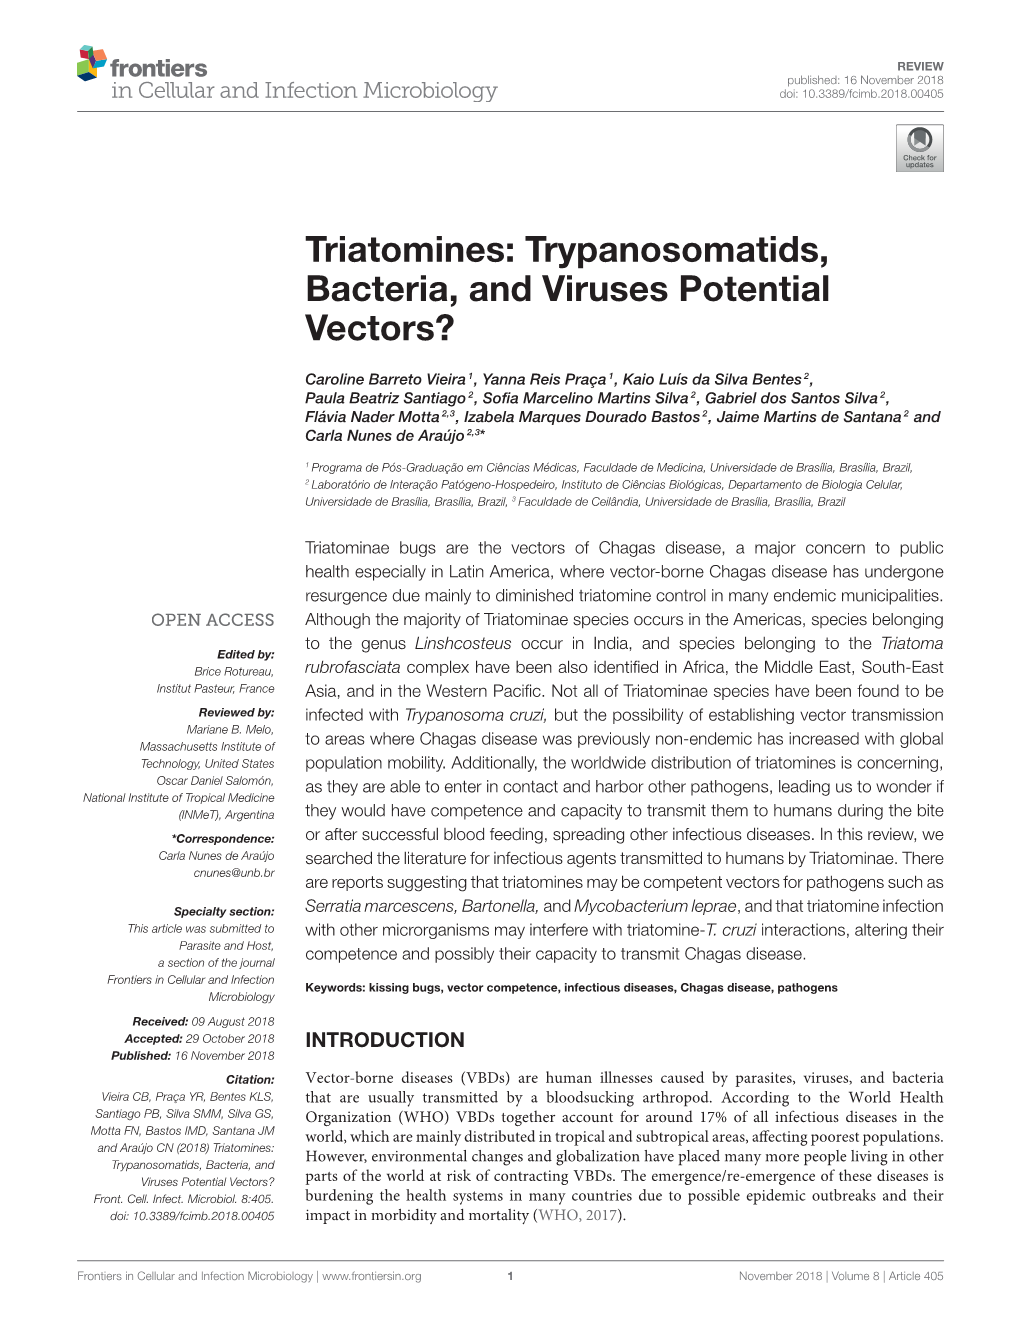 Trypanosomatids, Bacteria, and Viruses Potential Vectors?